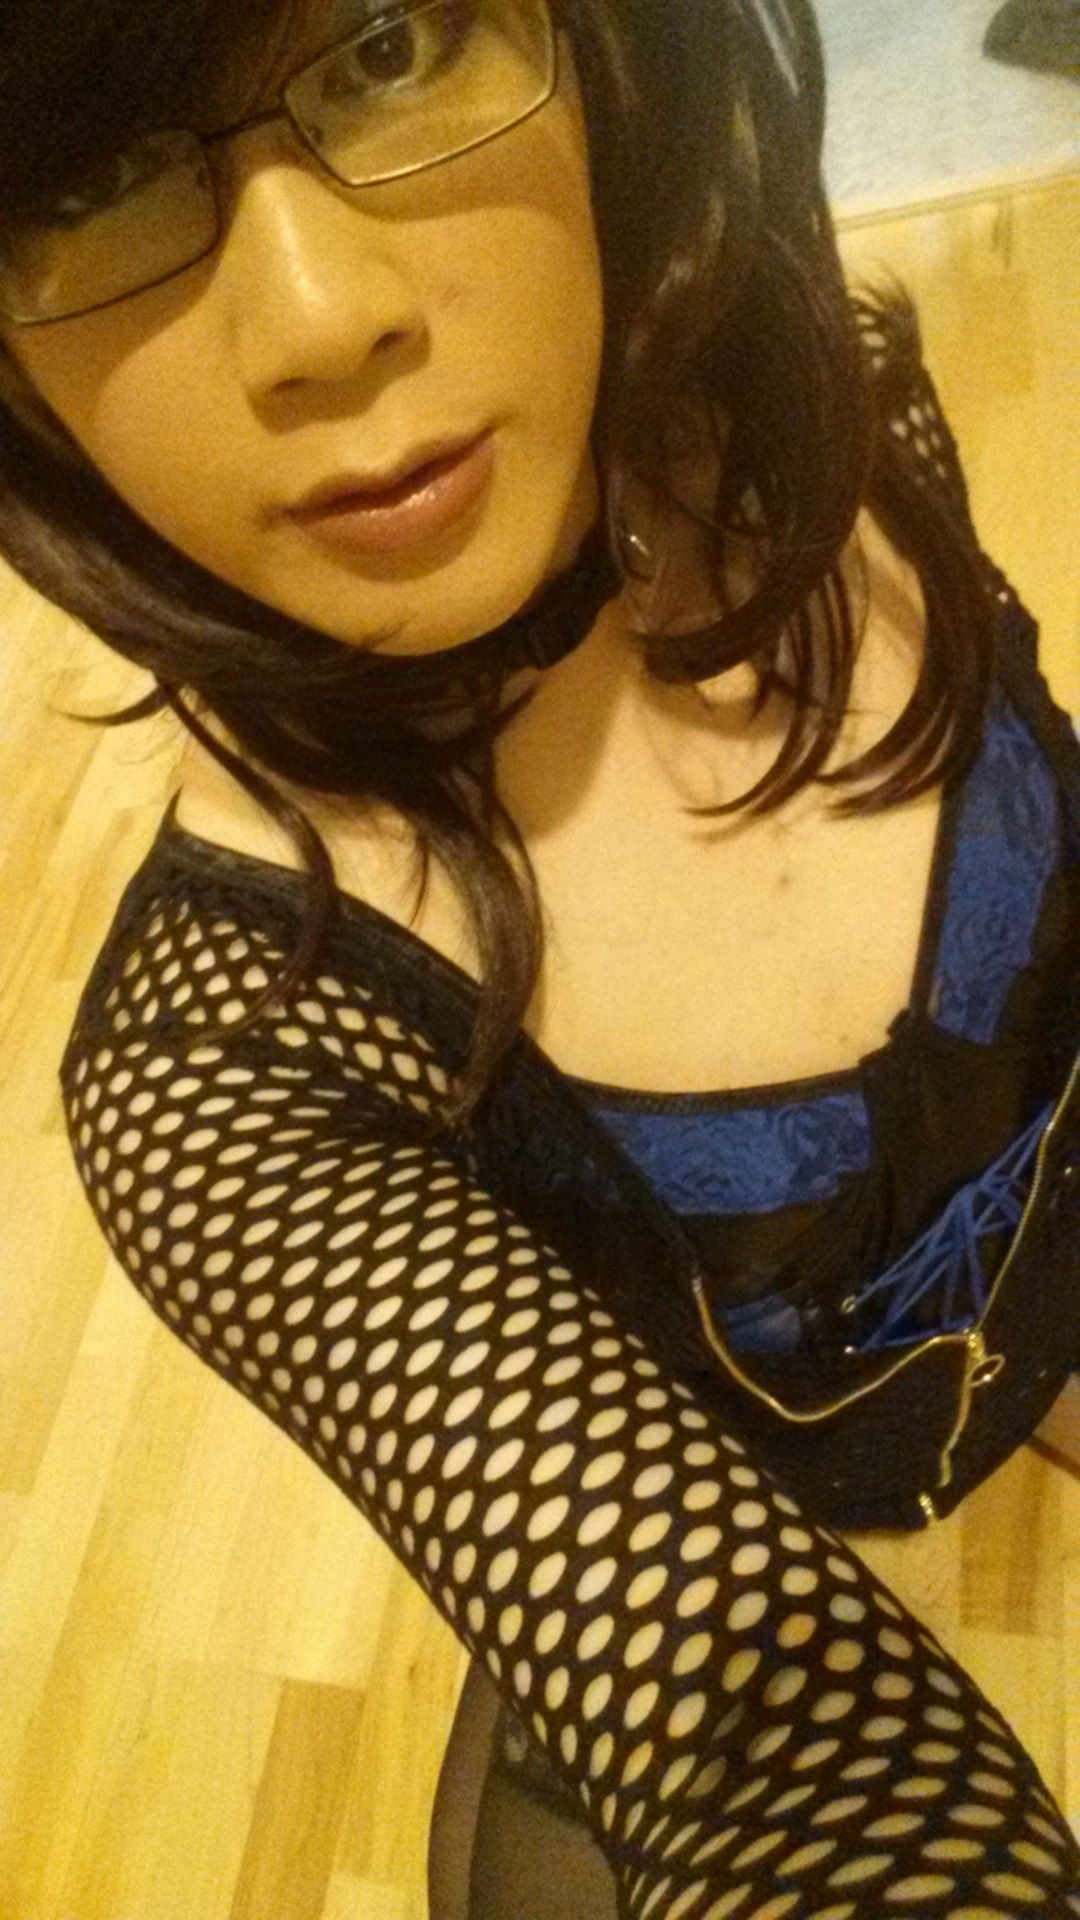 solfall:  New blue lingerie someone bought for me off my wishlist!  Thank you mystery